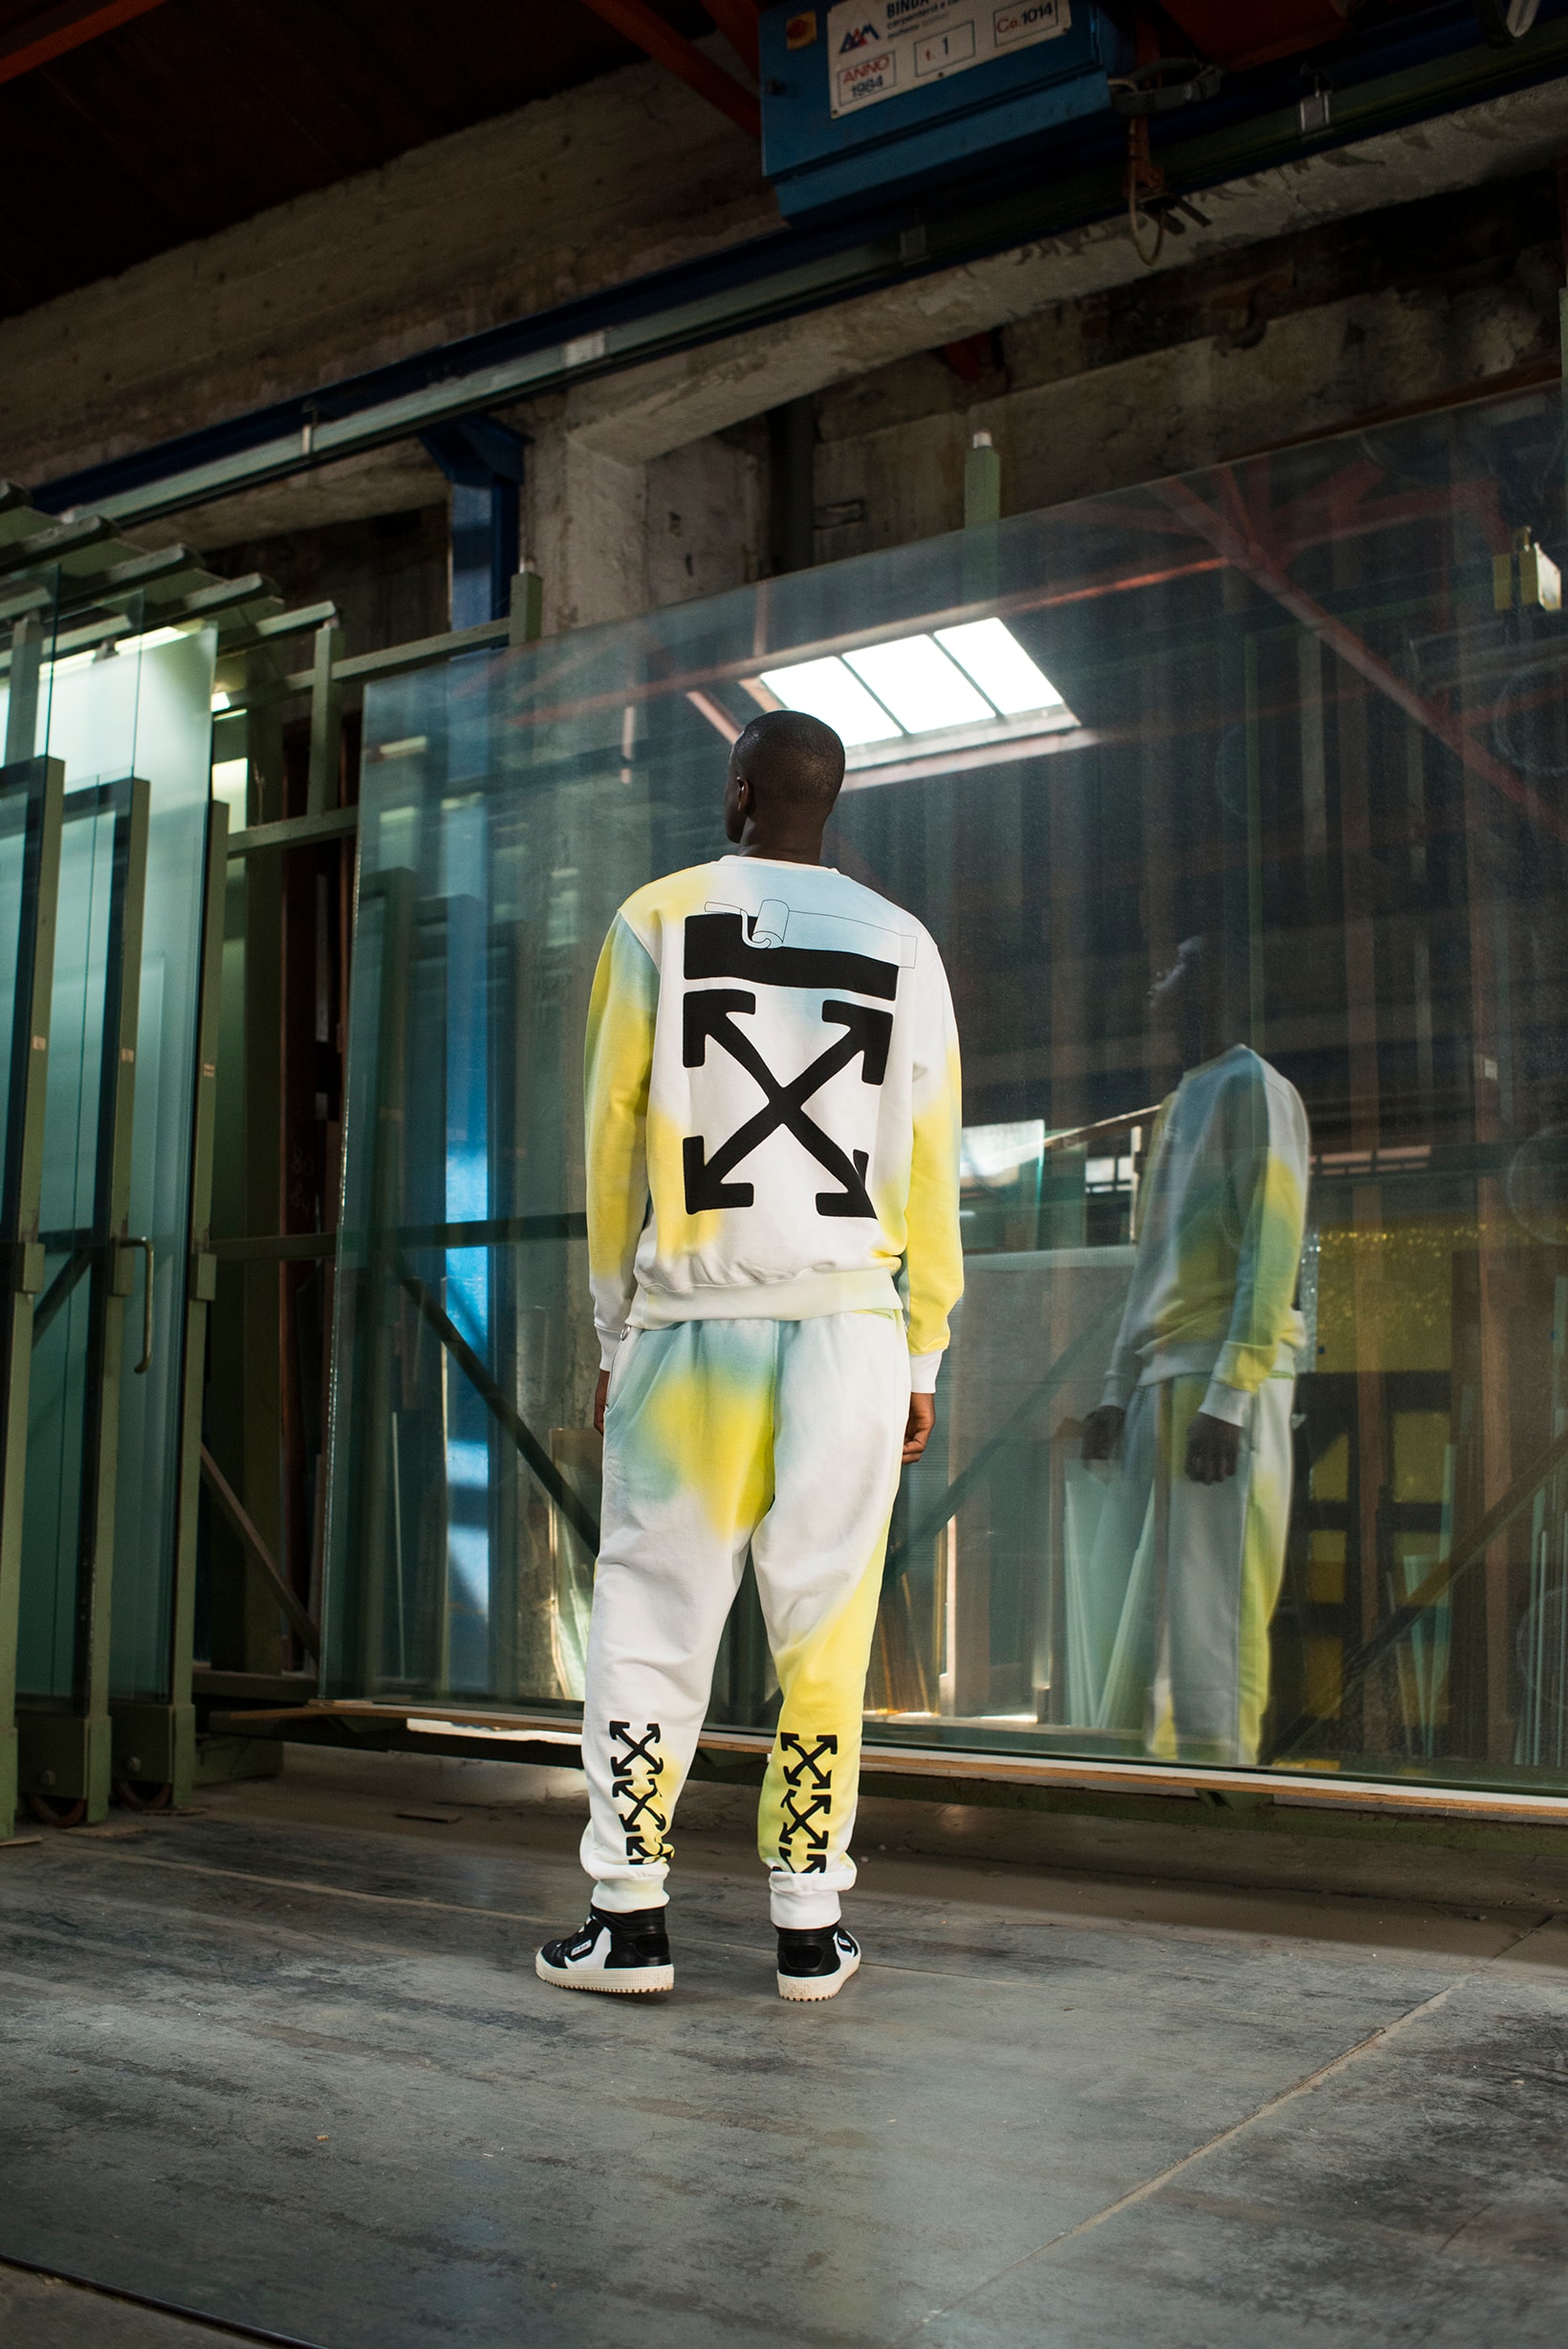 Off-White™ x The Webster 2018 夏季聯名別注系列